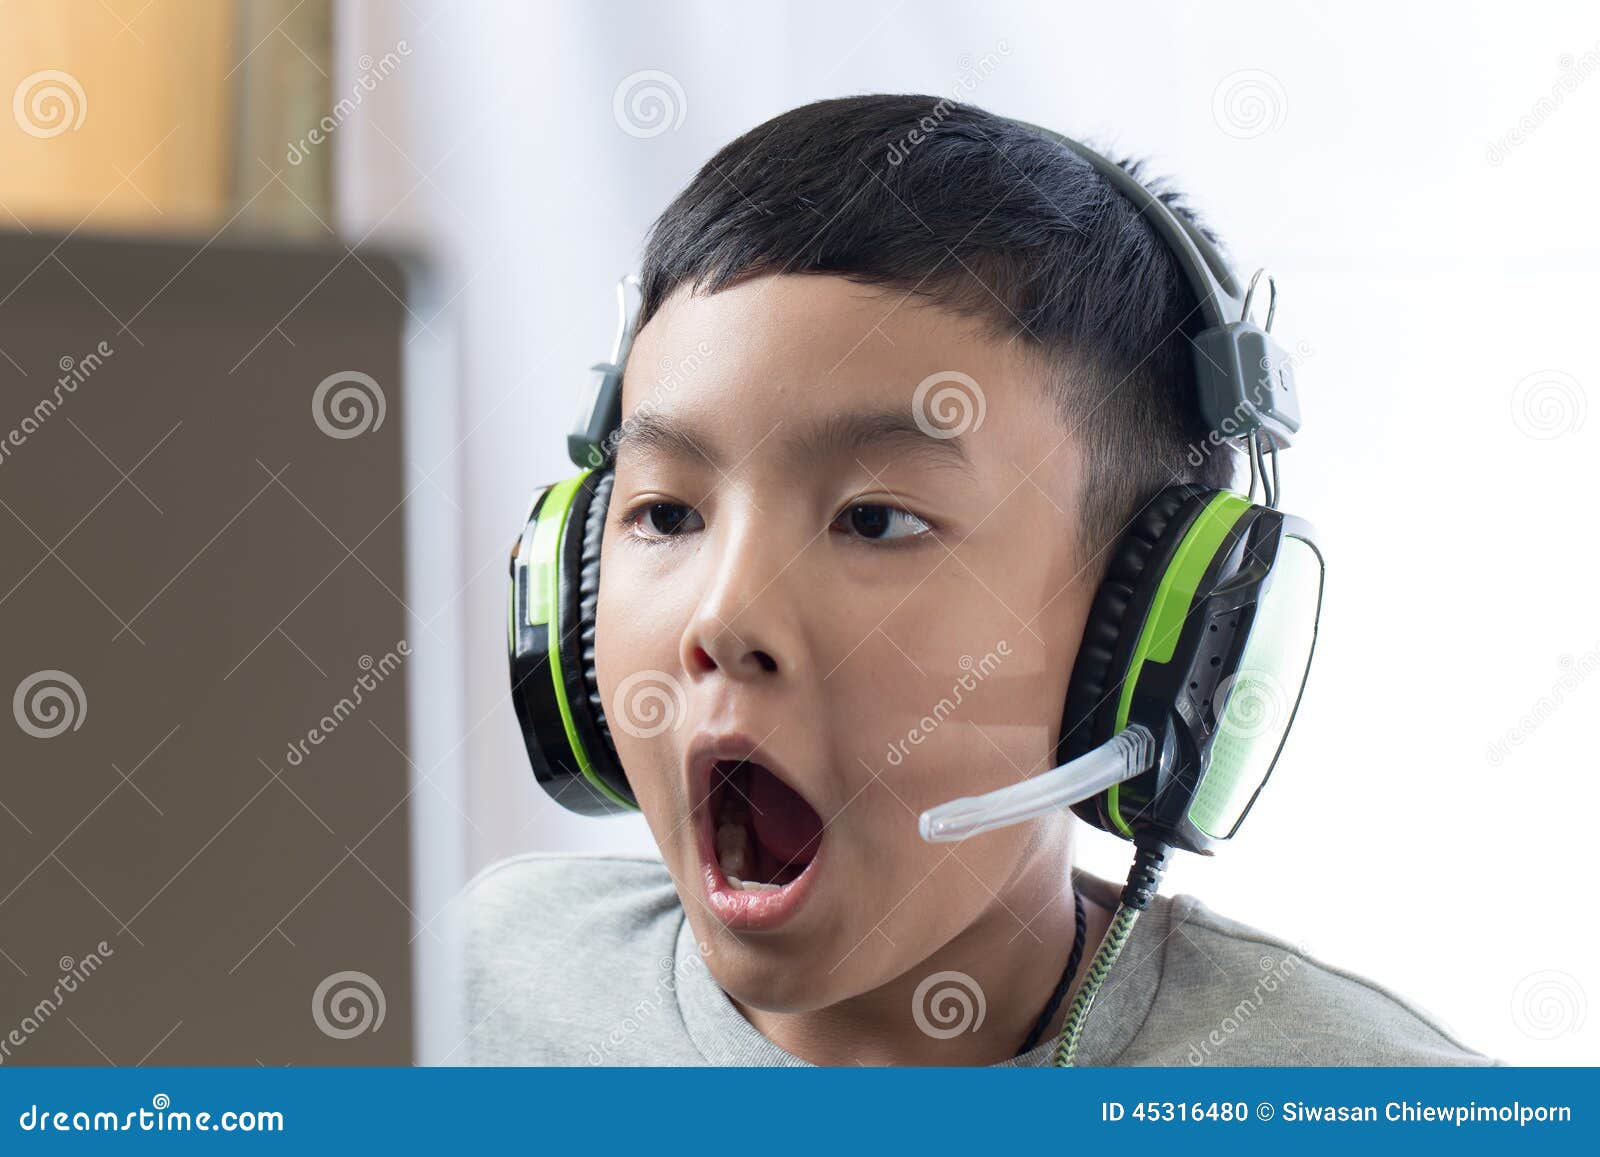 Image result for asian kid